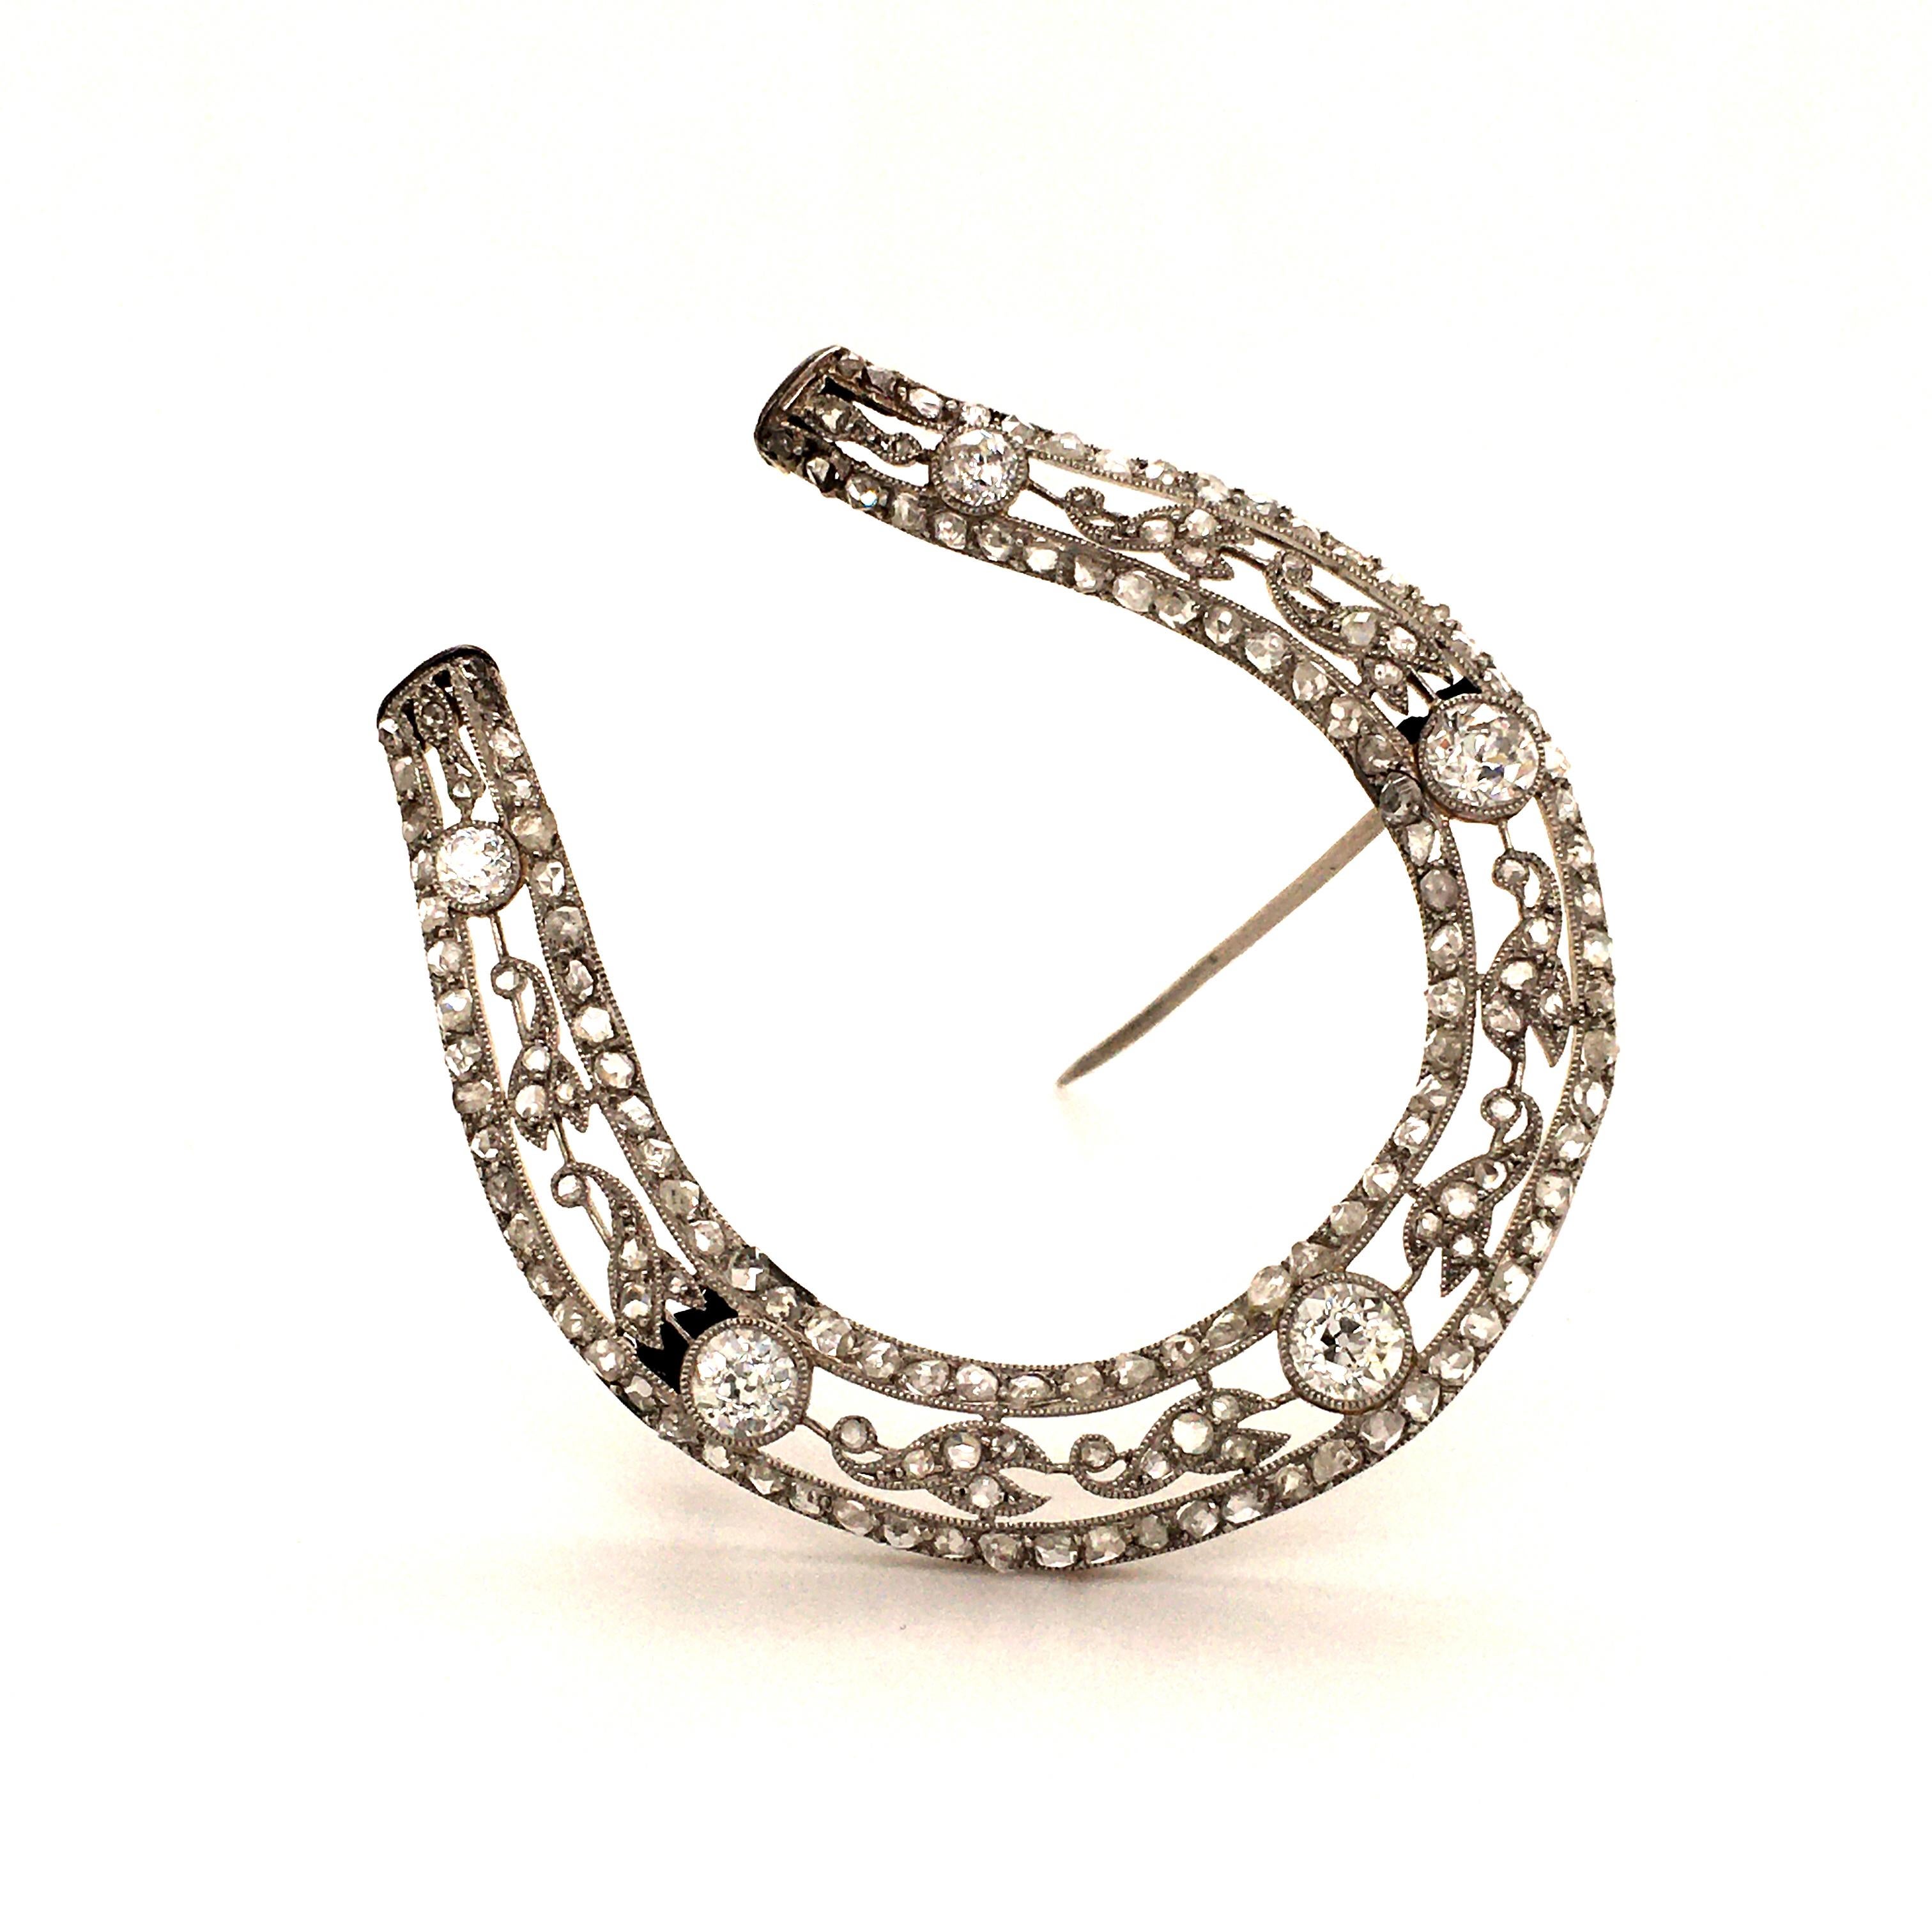 This delicate Edwardian horseshoe brooch is millegrain set with 5 Old European cut diamonds, total weight approximately 1.90 carats. The frame as well as the floral decorations are set with a charming mix of old rose cut diamonds of various